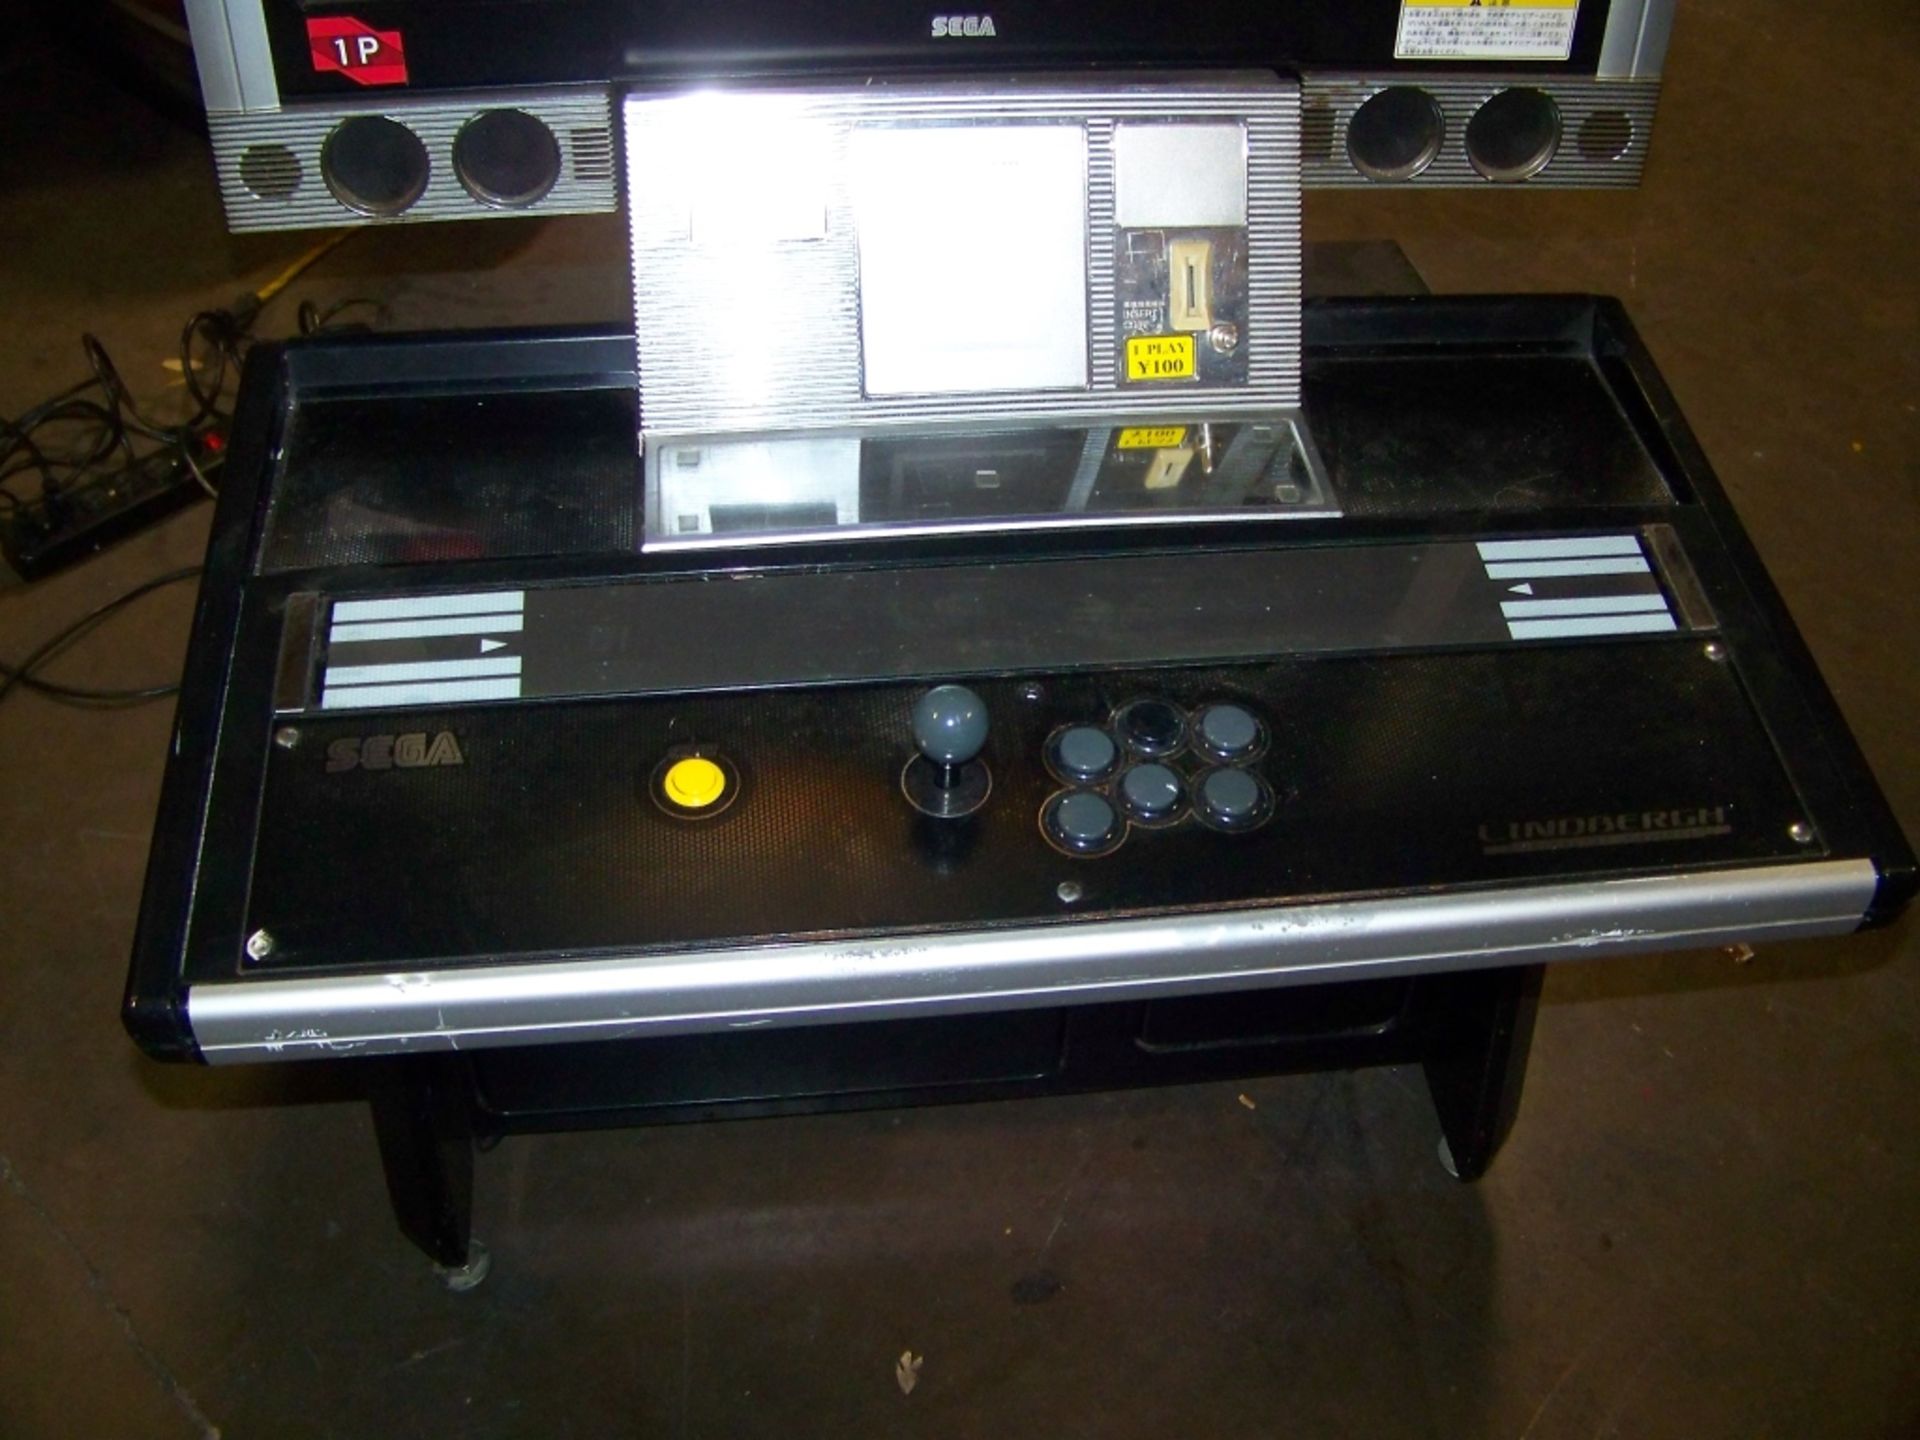 SEGA LINDBERGH LCD CANDY CABINET 1 PLAYER - Image 2 of 3